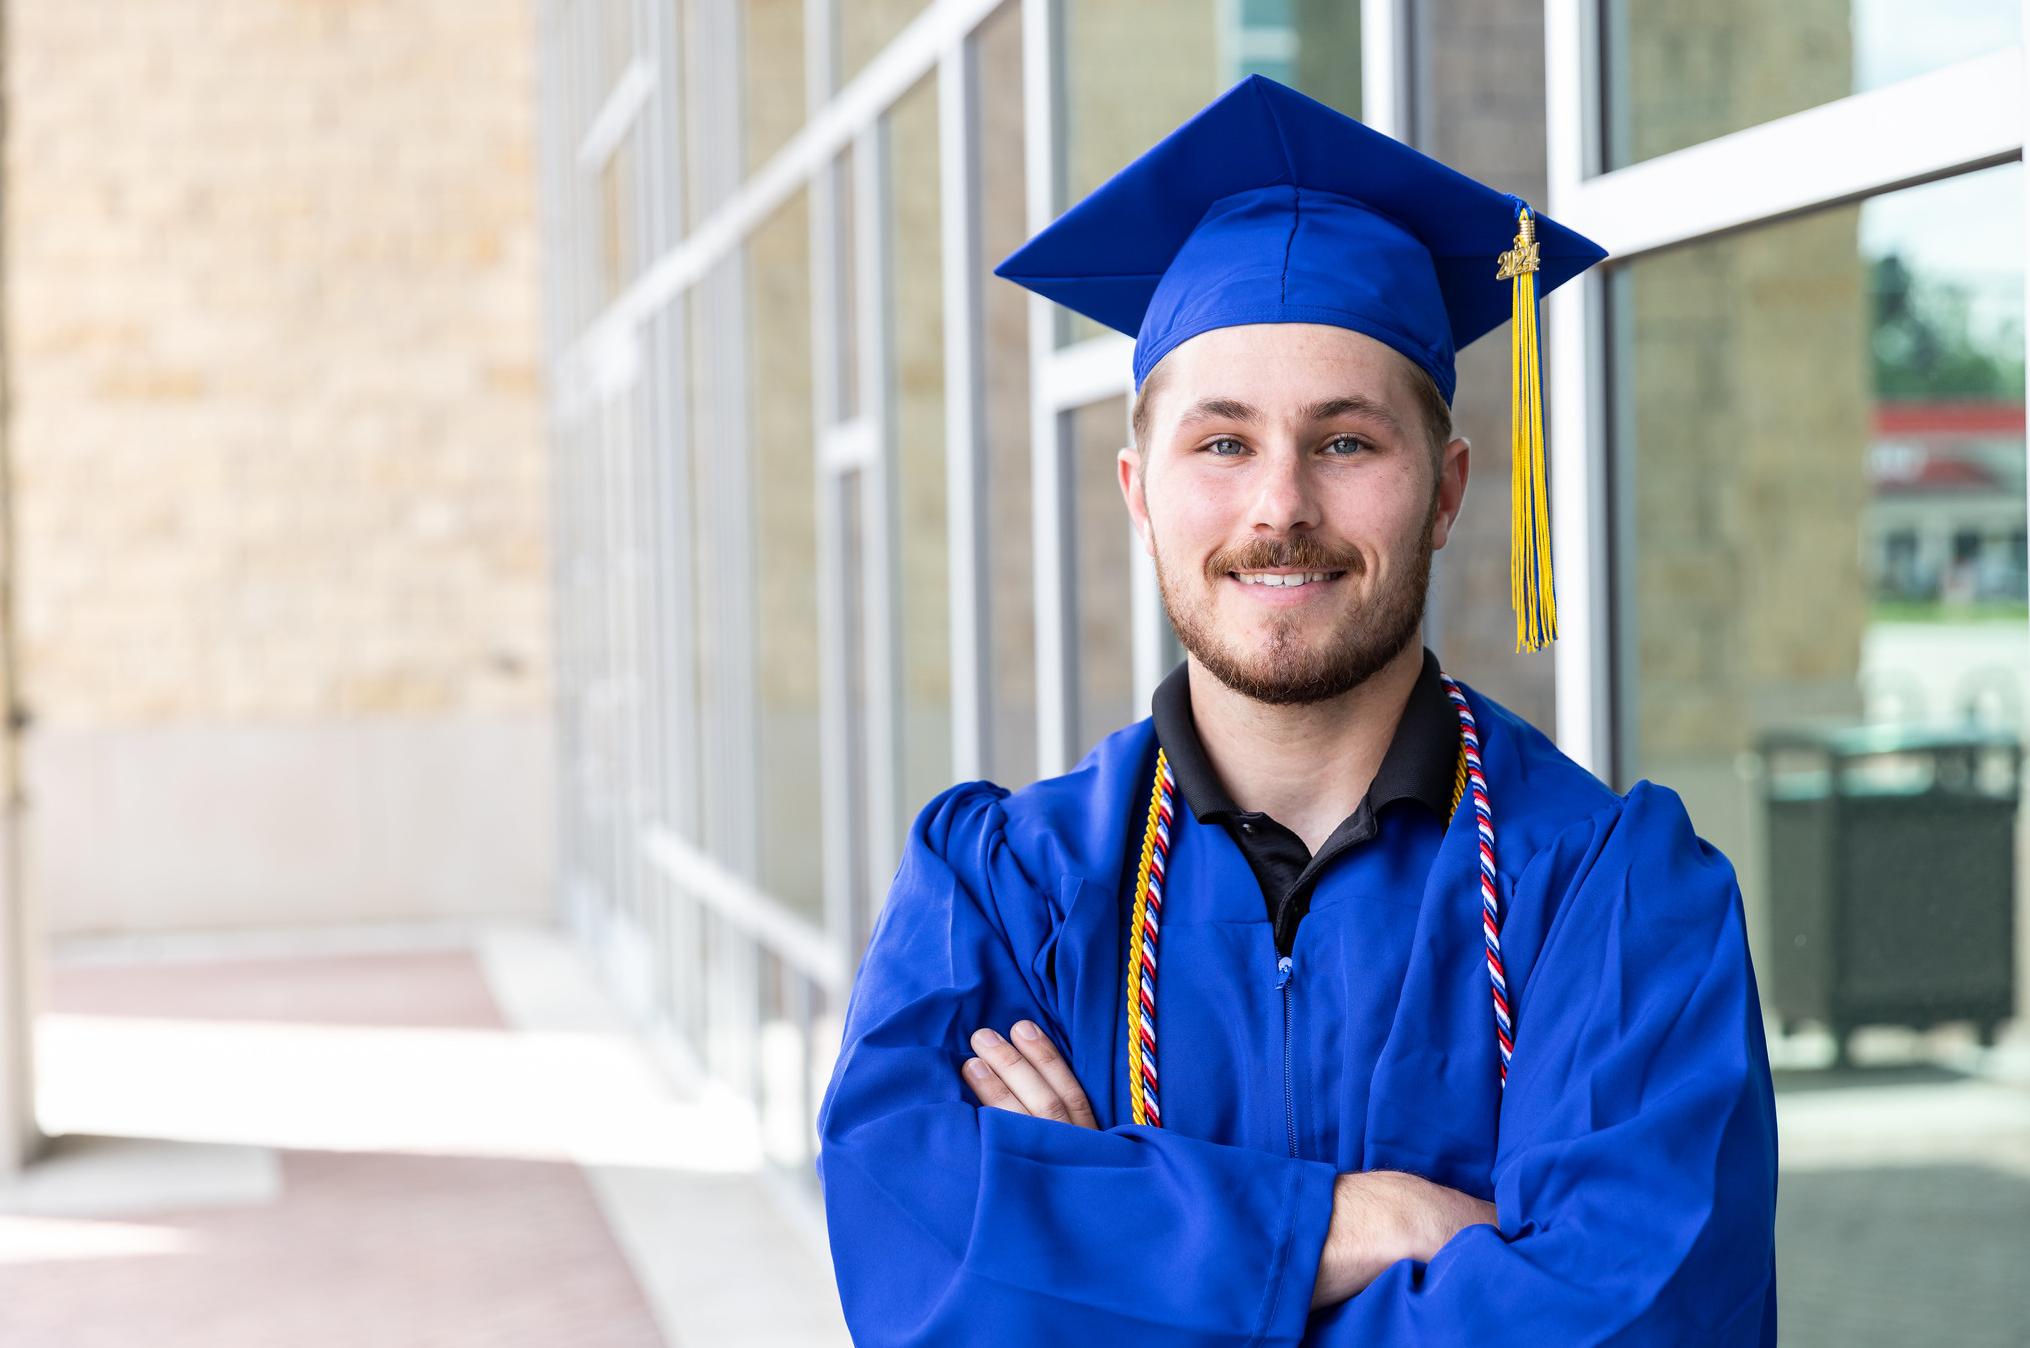 man standing in blue cap and gown outside of a building with a lot of windows